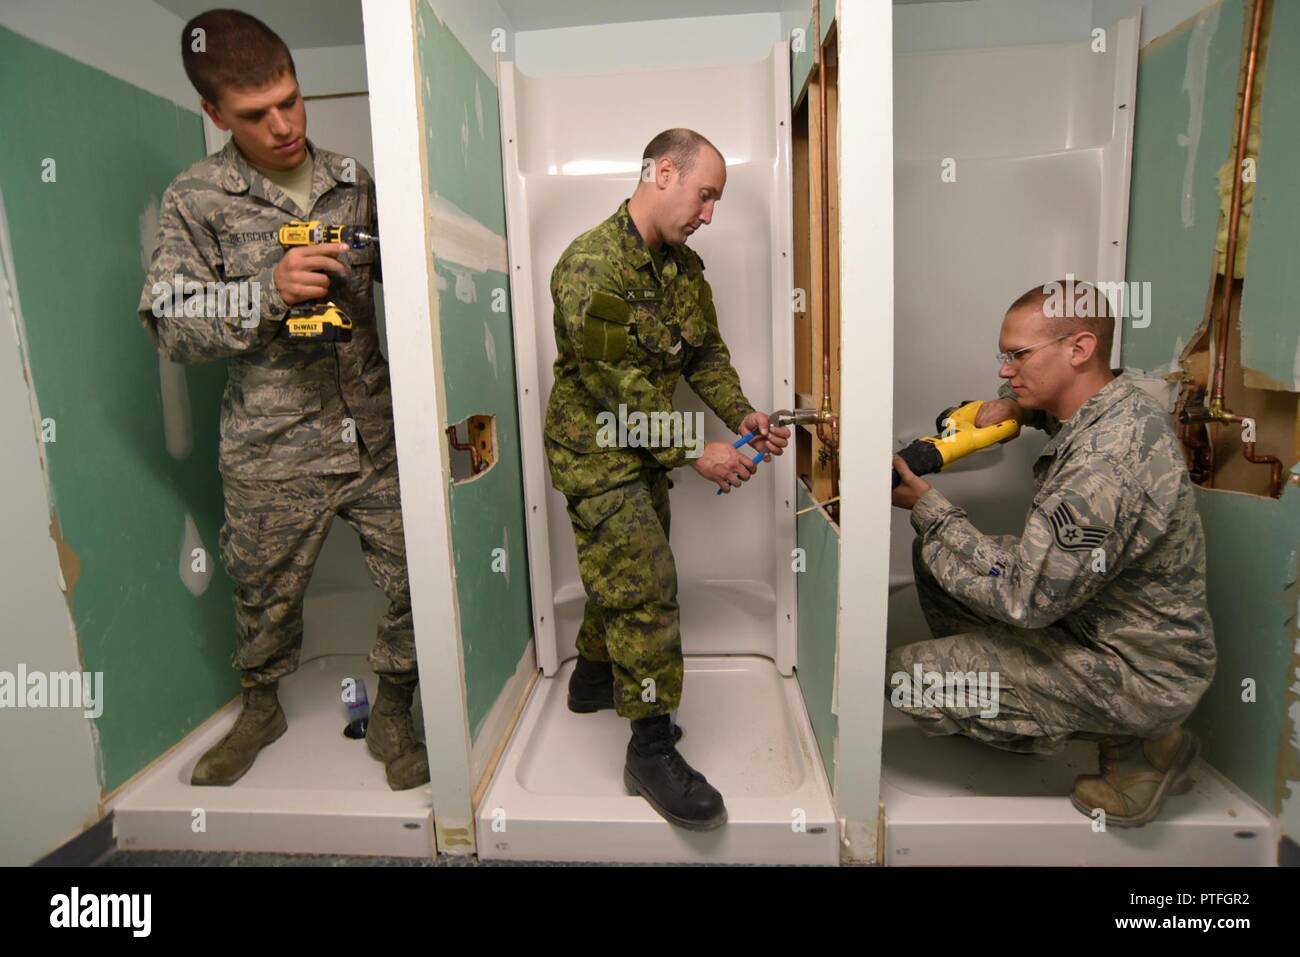 Oregon Air National Guard Staff Sgt. Benjamin Schultz (right), along with Airman 1st Class Joshua Bietschek (left), and Canadian Armed Forces (CAF) Corporal Kyle Burrow (center) work on various tasks to rebuild three showers at the military personnel building in Yellowknife, Northwest Territories, Canada, July 21, 2017. The Oregon Airmen are also collaborating with Canadian Armed Forces members from Cold Lake, Alberta, who are also deployed to Yellowknife for training. Stock Photo